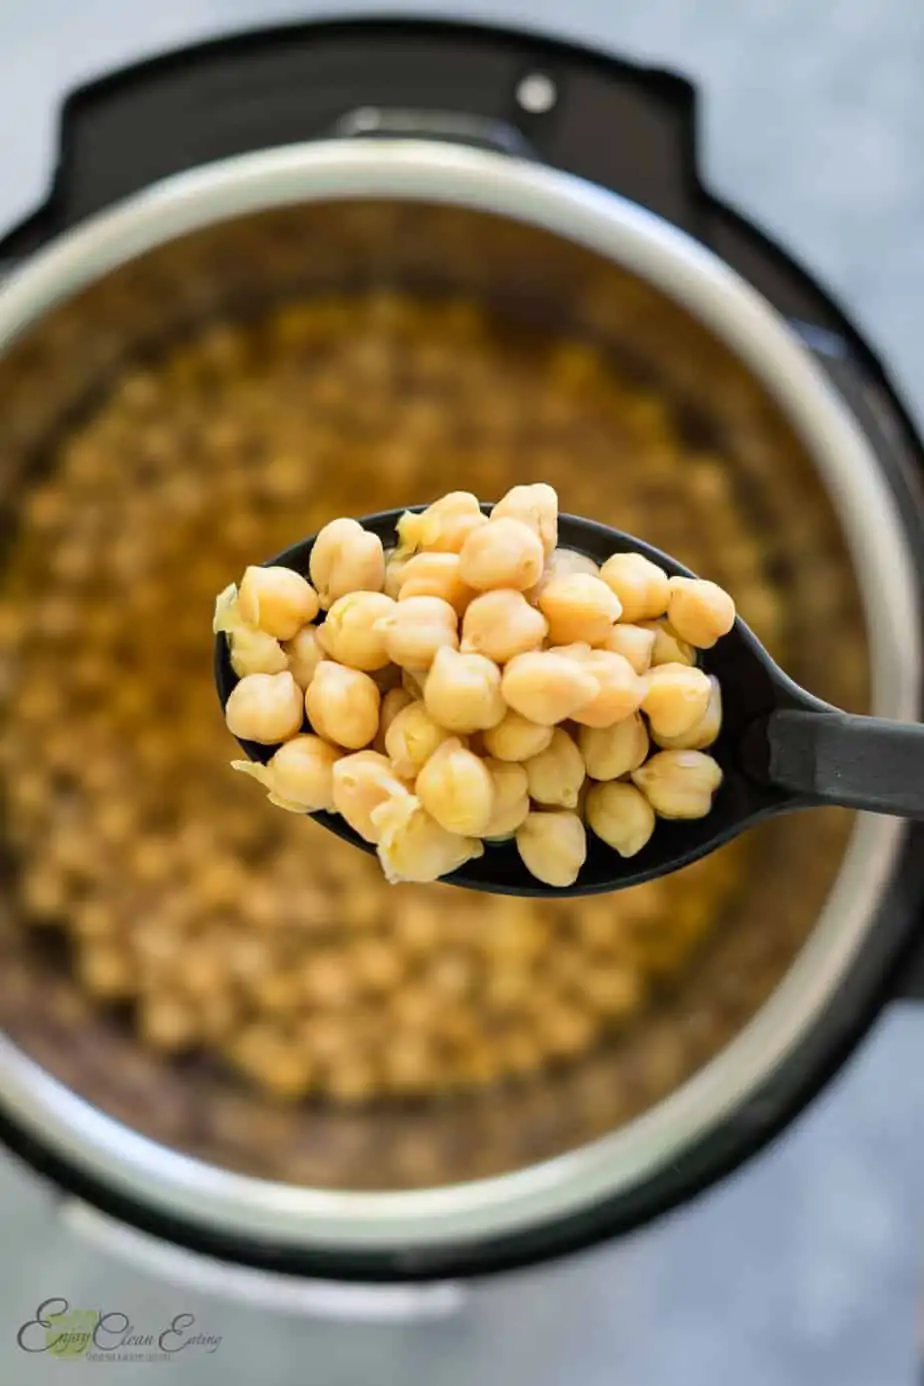 Holding the perfectly cooked chickpeas in the instant pot with a cooking spoon.